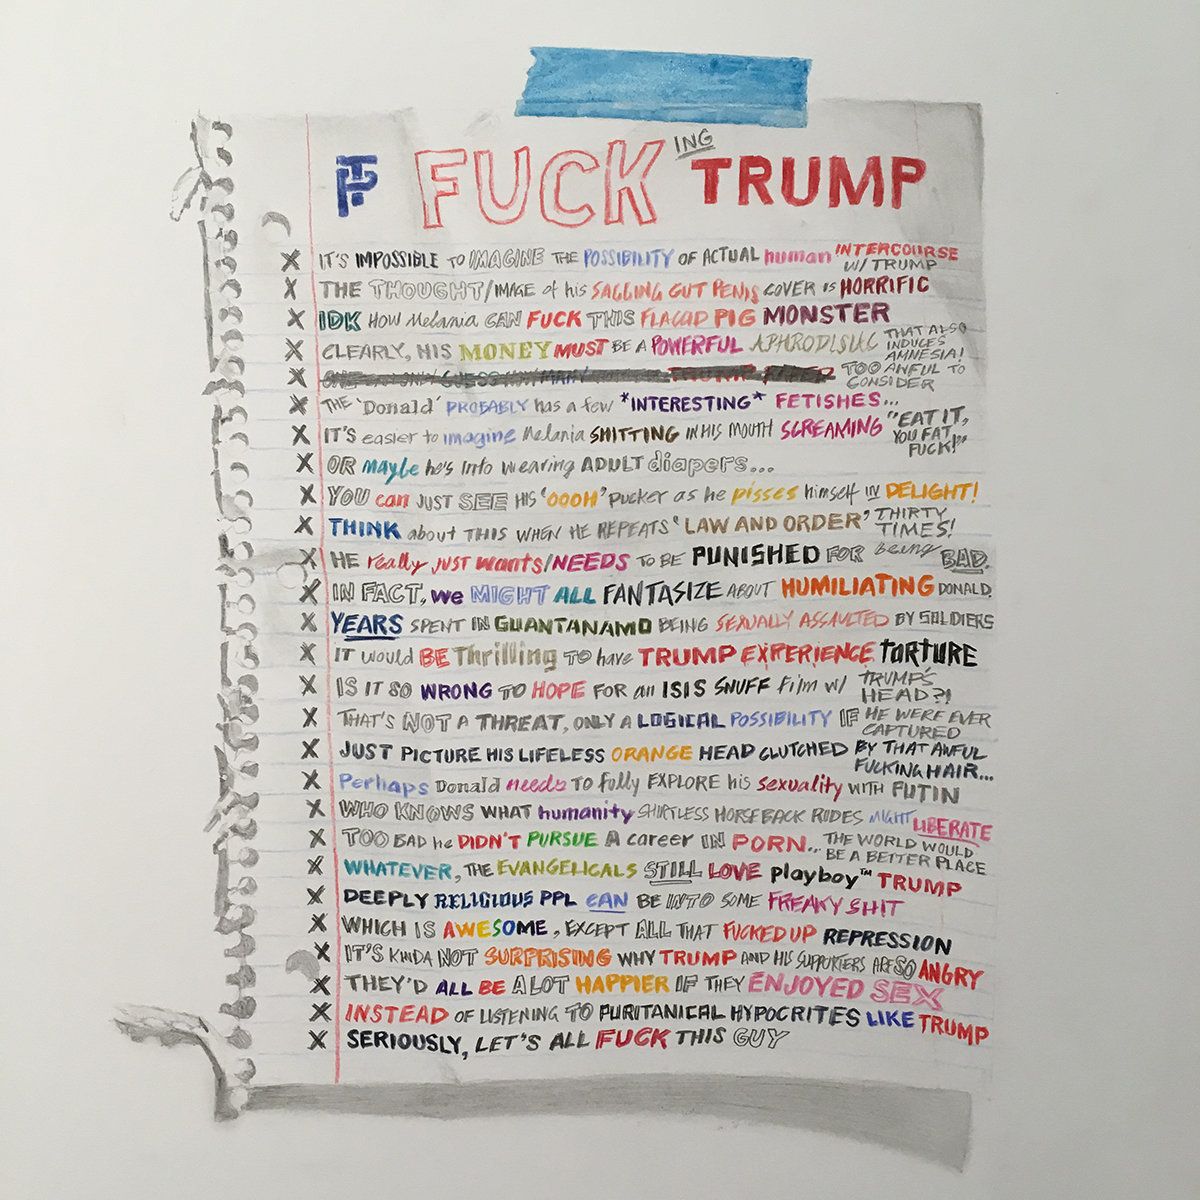 William Powhida, "Fuck(ing) Trump," 2016, graphite, colored pencil, and watercolor on paper, 24 x 18 inches (61 x 45.7 cm)